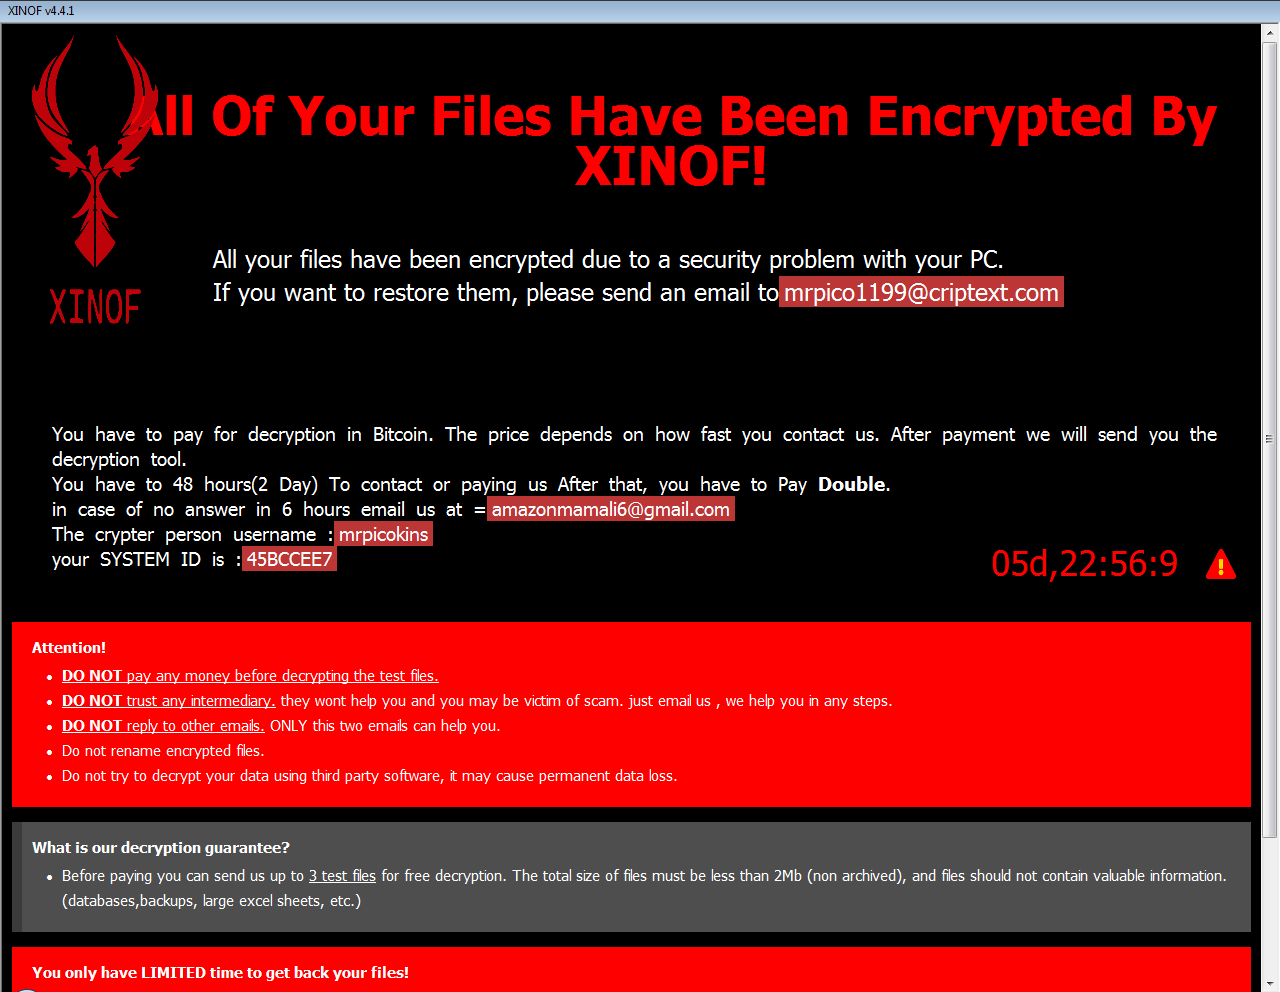 Choose the relevant ransomware from the list
Download the decryption tool provided